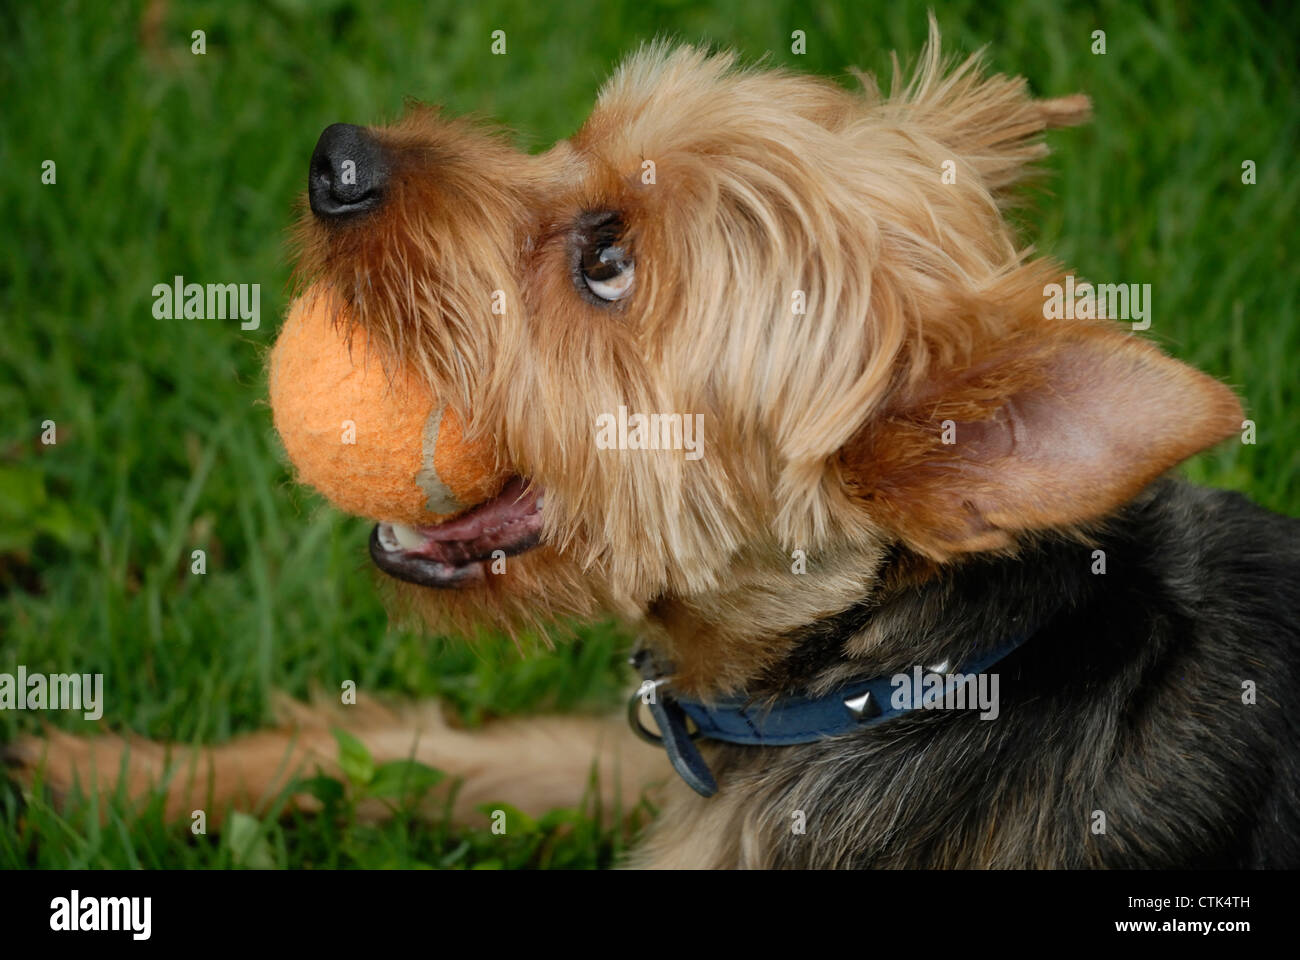 A larger sized Yorkshire Terrier dog holding a tennis ball in his mouth. Stock Photo